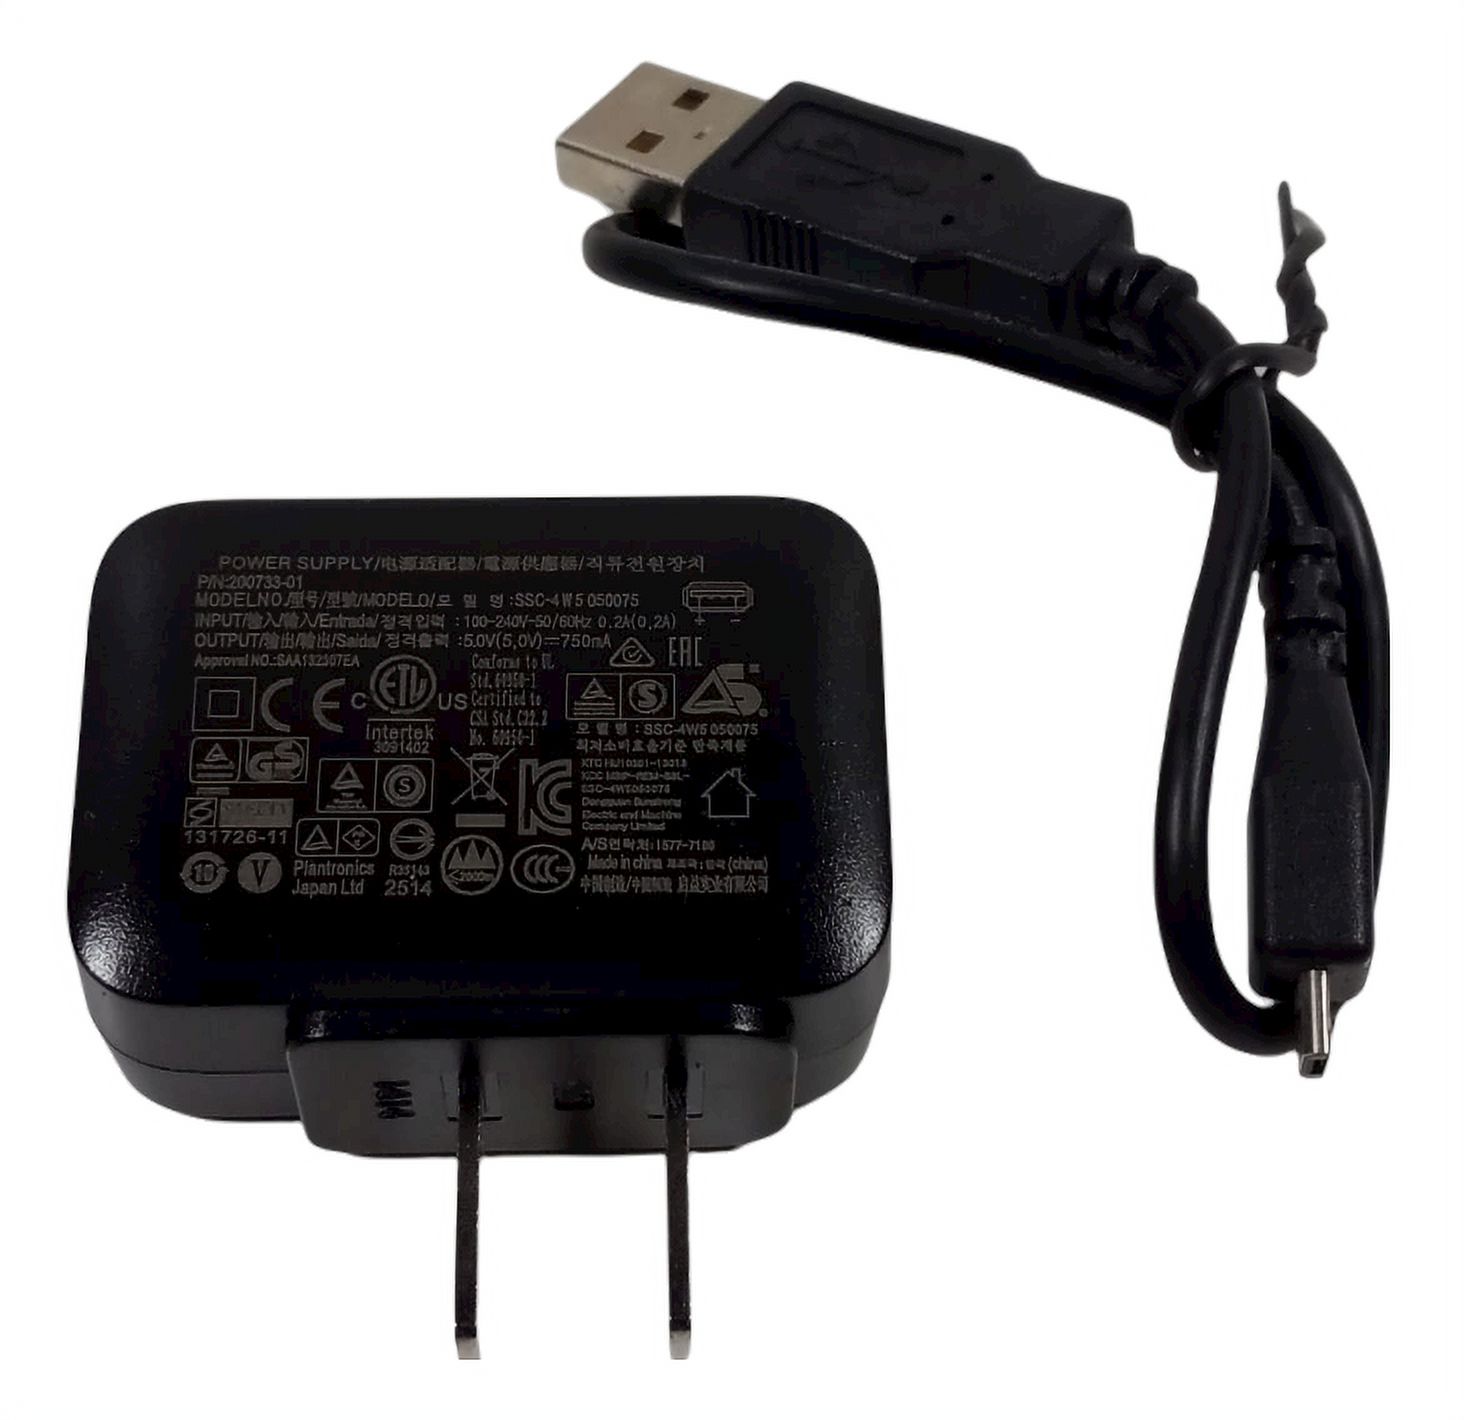 Plantronics SSC-4W5 050075 5.0V 750mA AC Power Adapter Charger 200733-01 - image 3 of 5